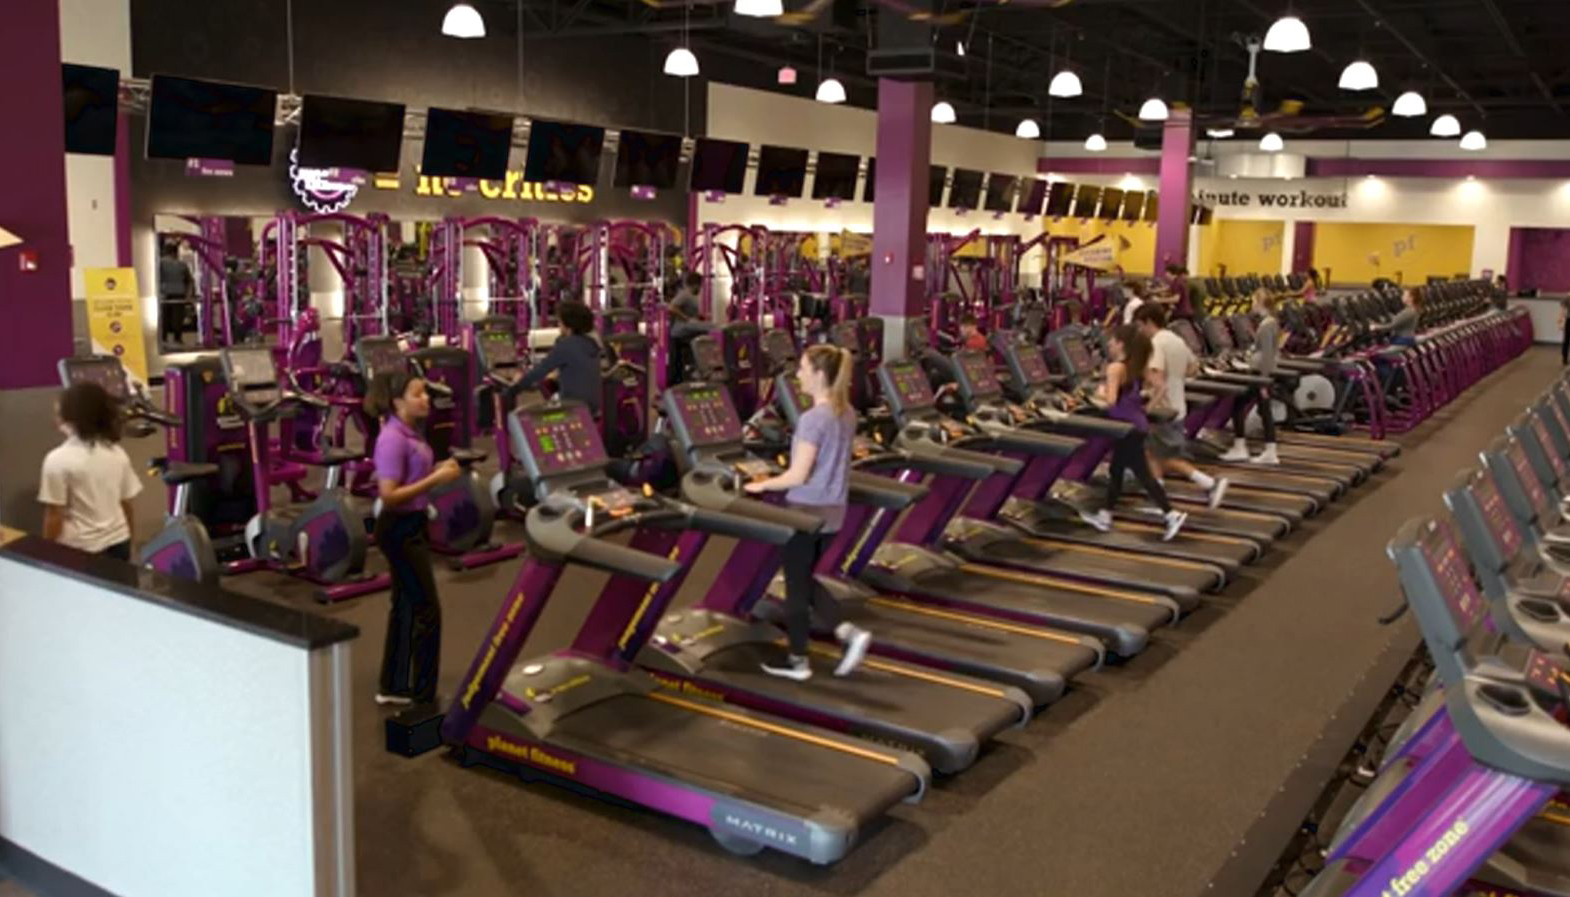 Planet Fitness offers high school teens free workouts all summer